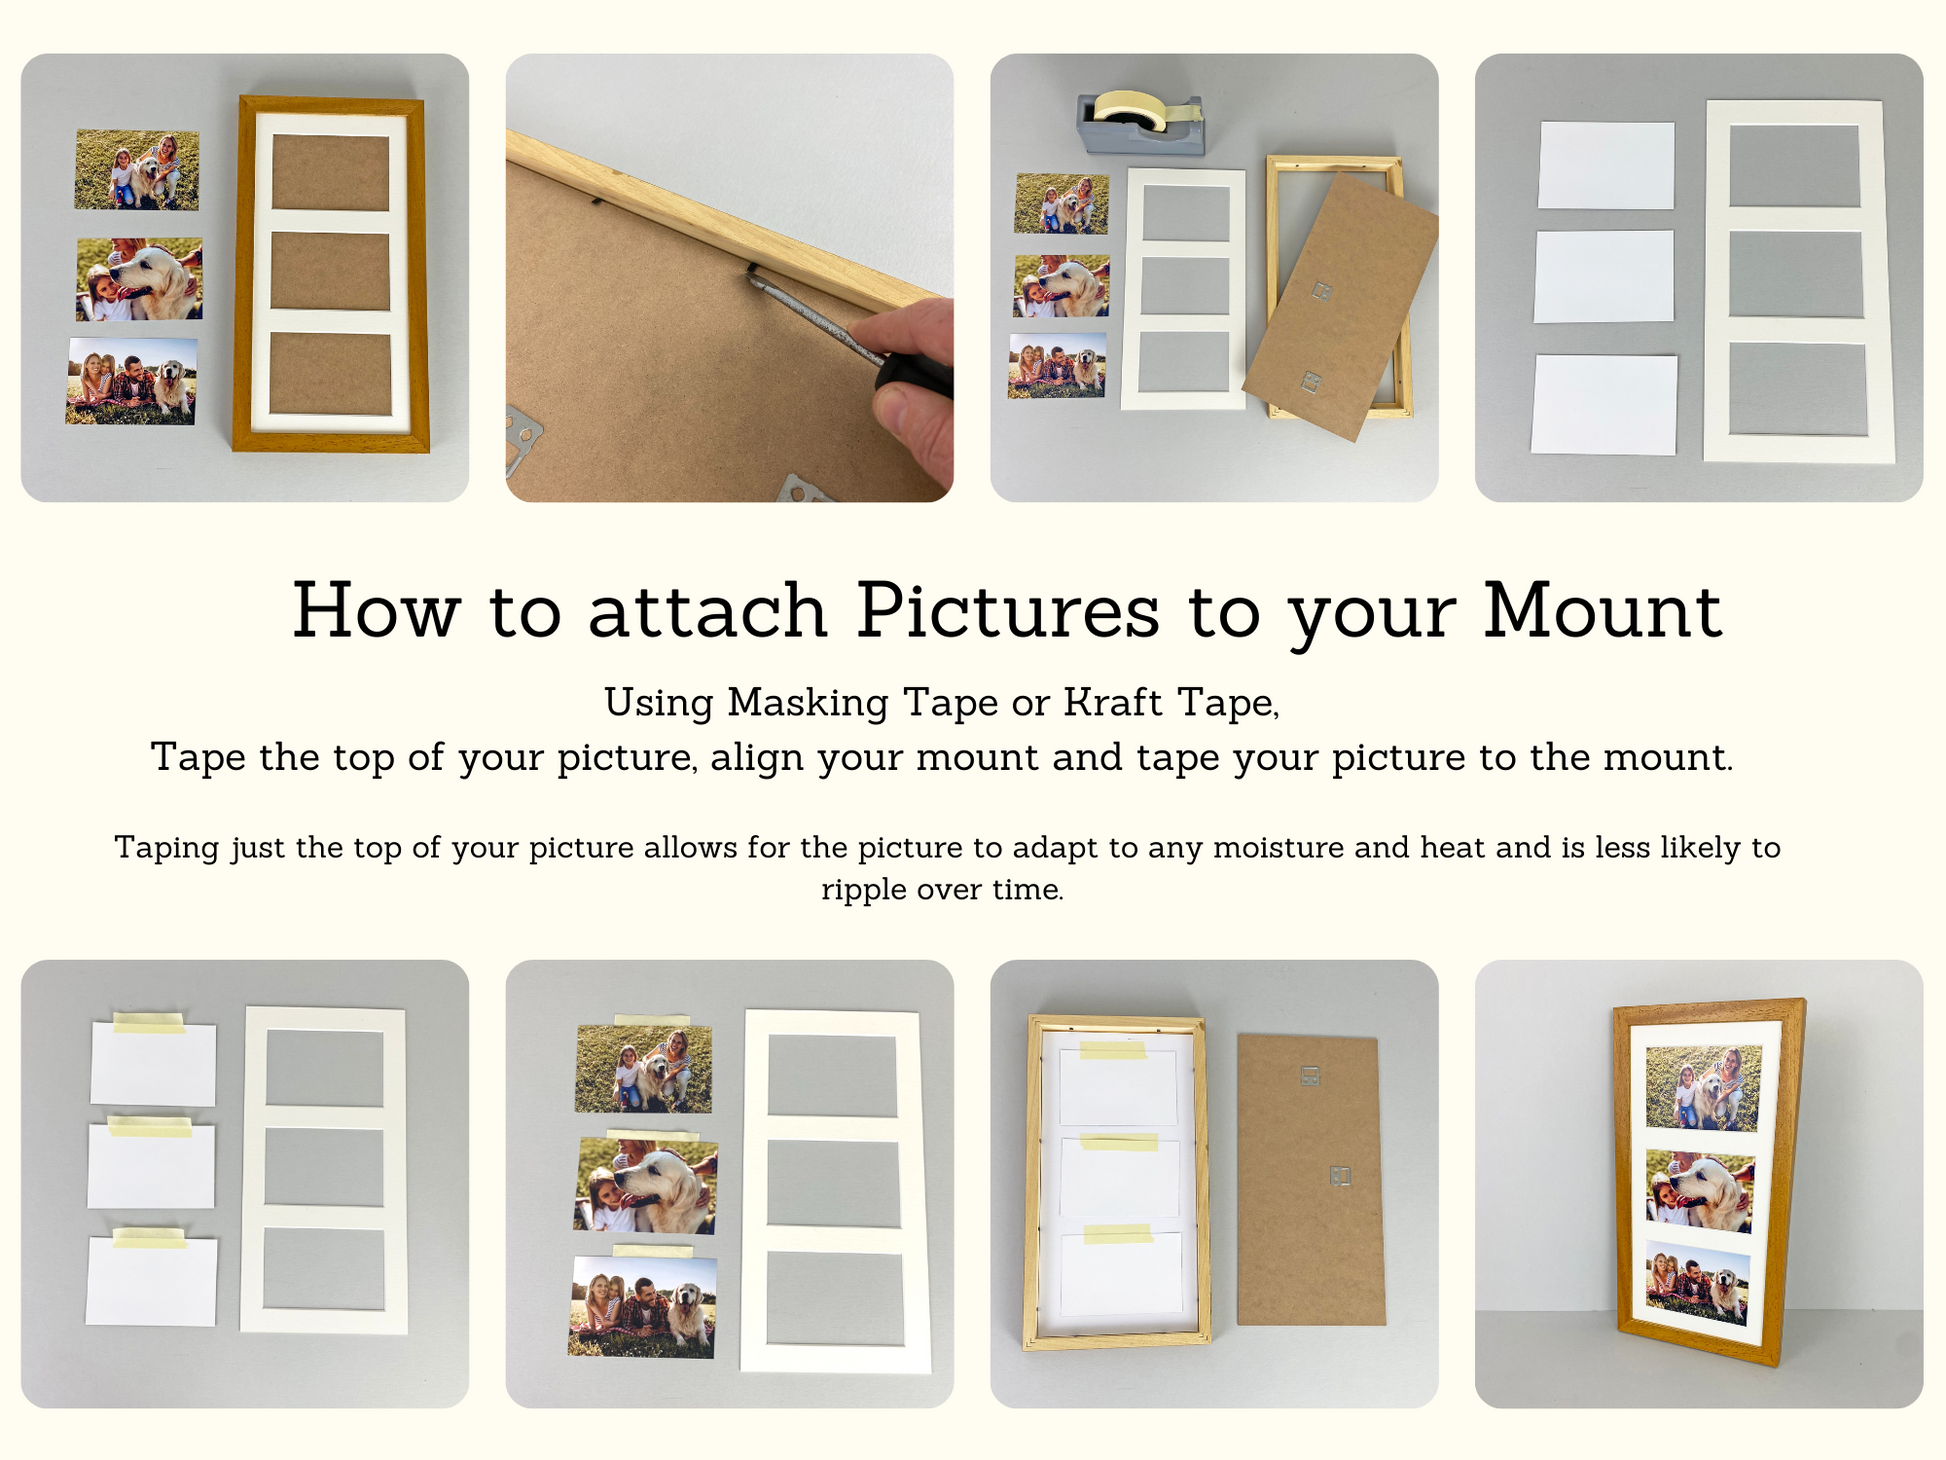 Multi Photo Picture Frame Holds 6 6x4 Photos in a 22mm White Wood